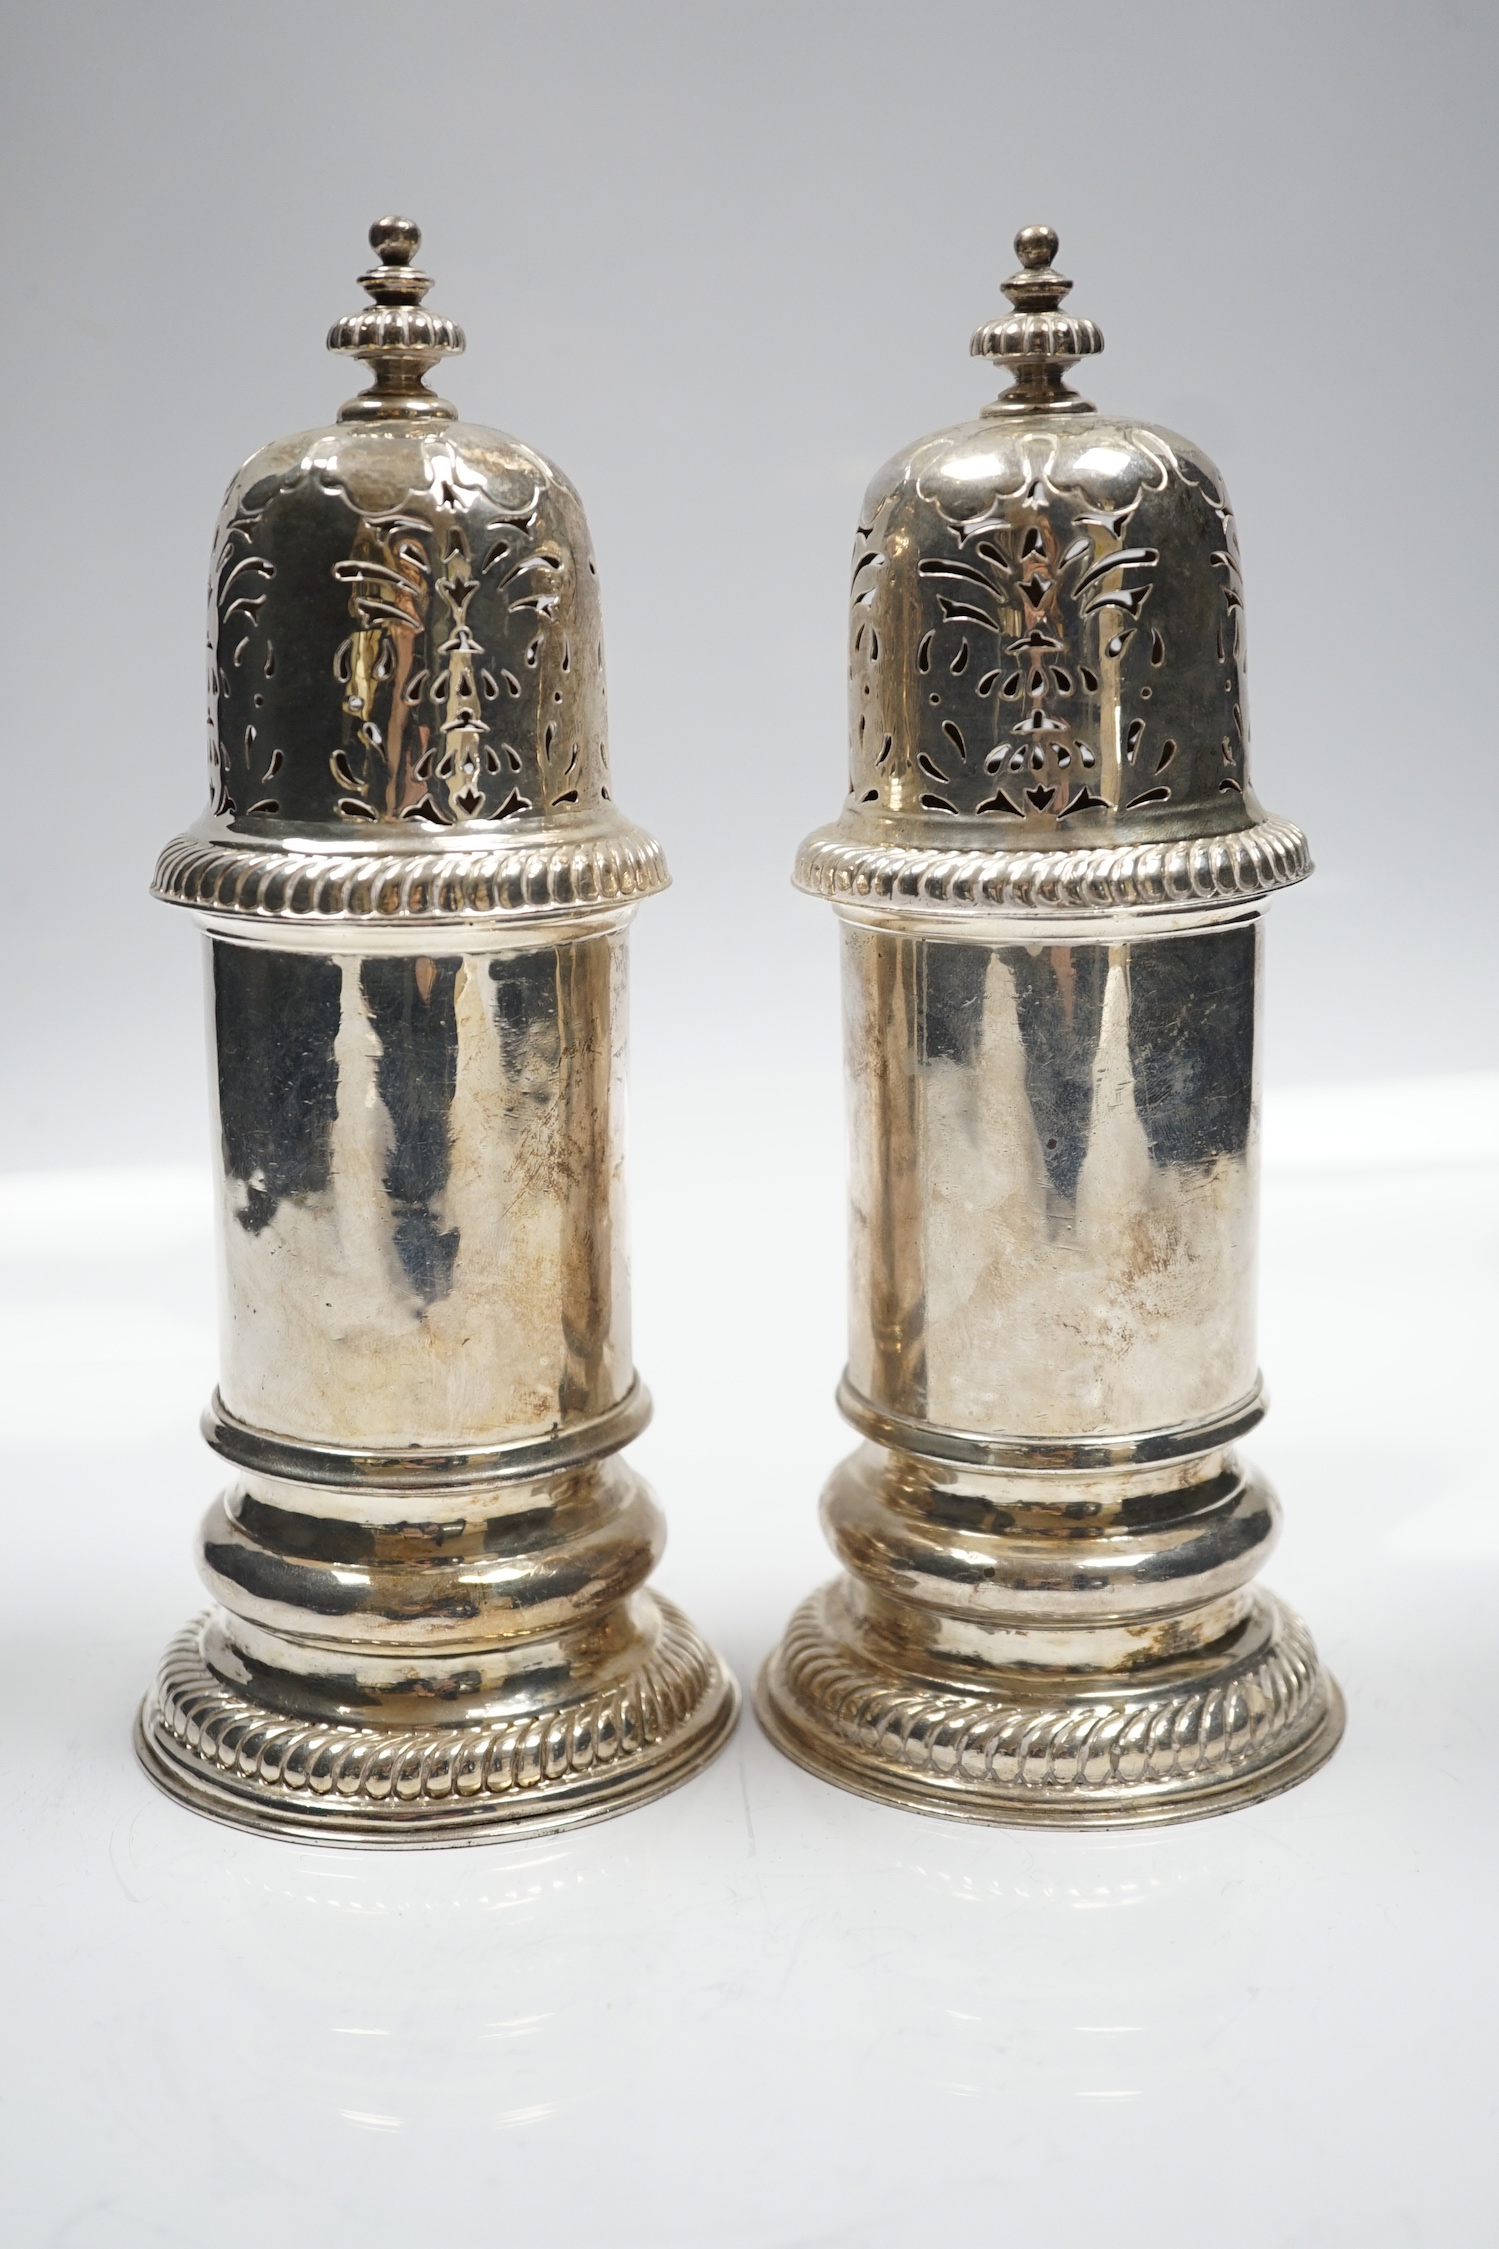 A matched pair of Britannia standard silver lighthouse sugar casters, Carrington & Co, London, 1903 and Wilson & Gill, London, 1963, 20.8cm, 22.6oz.